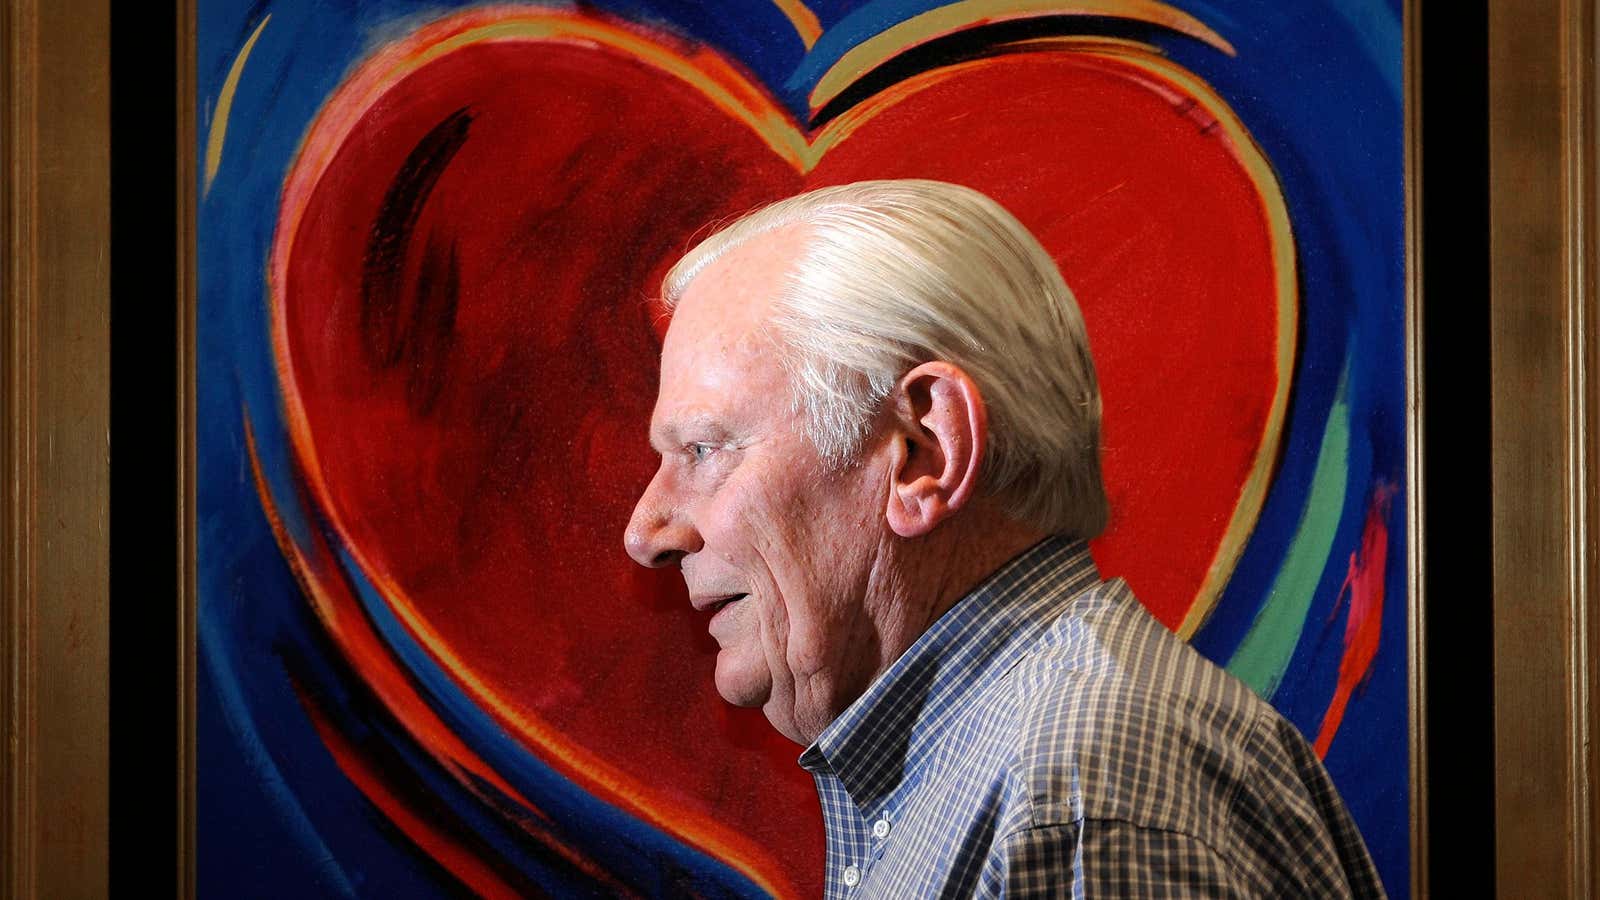 Herb Kelleher kept a purpose at the heart of Southwest Airlines.